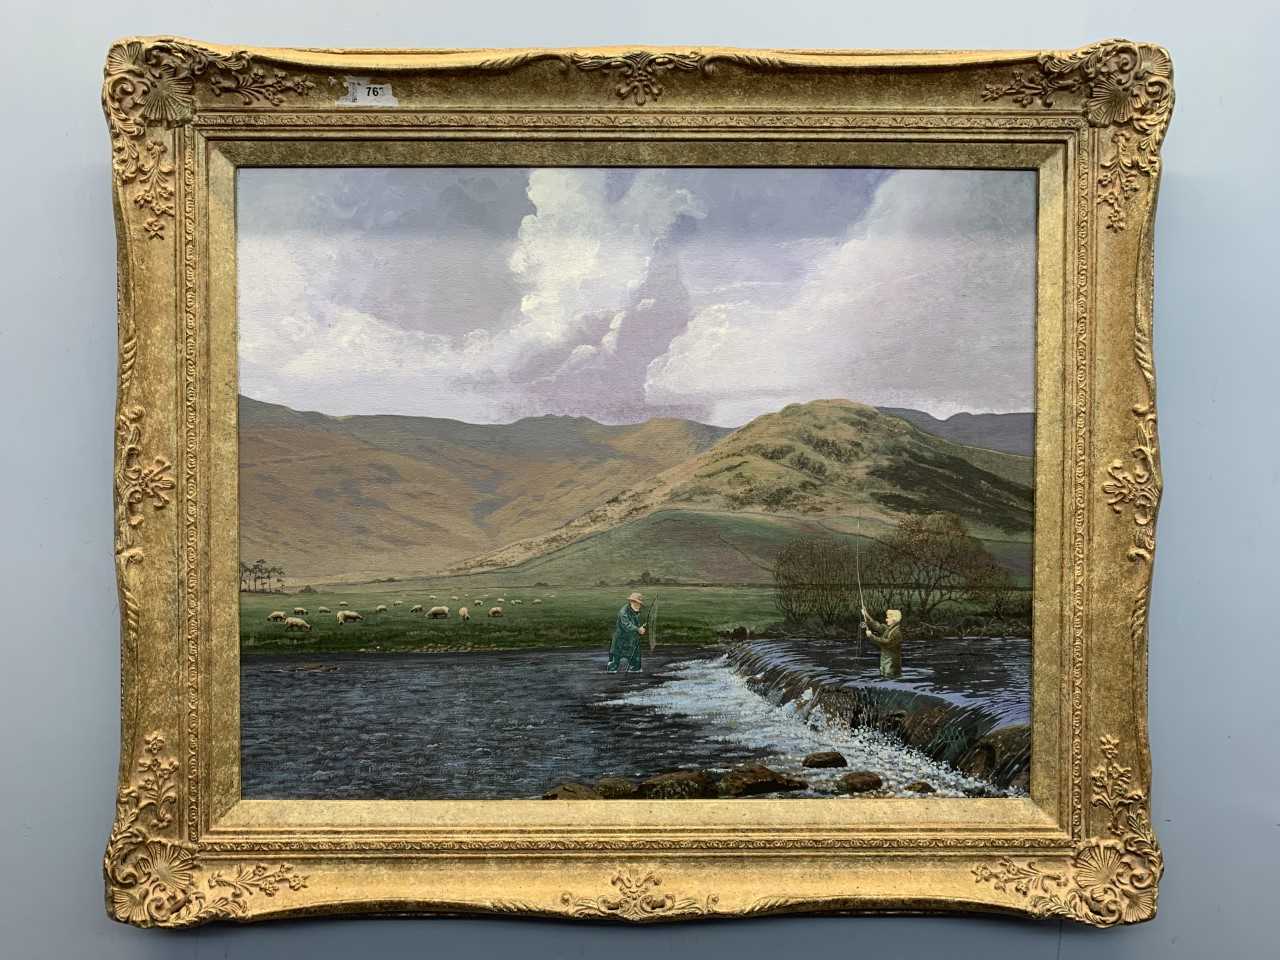 Michael Morley (British, b.1937), river fishing, acrylic on board, monogrammed, 19x15ins, framed. - Image 2 of 2